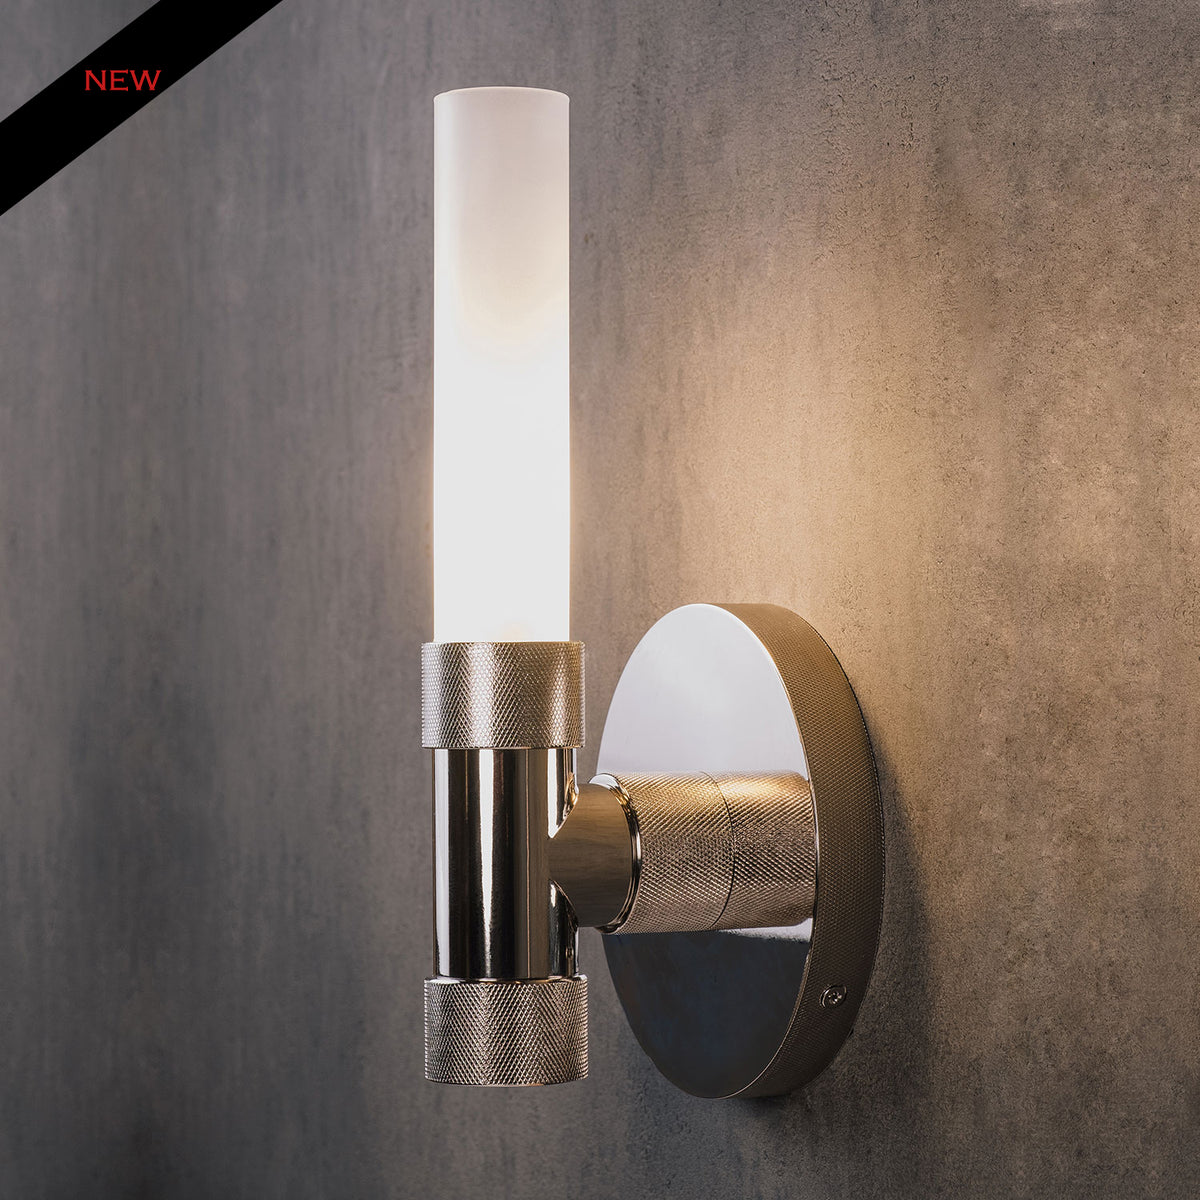 Elemental Classic Tee Sconce in polished nickel image 2 of 6